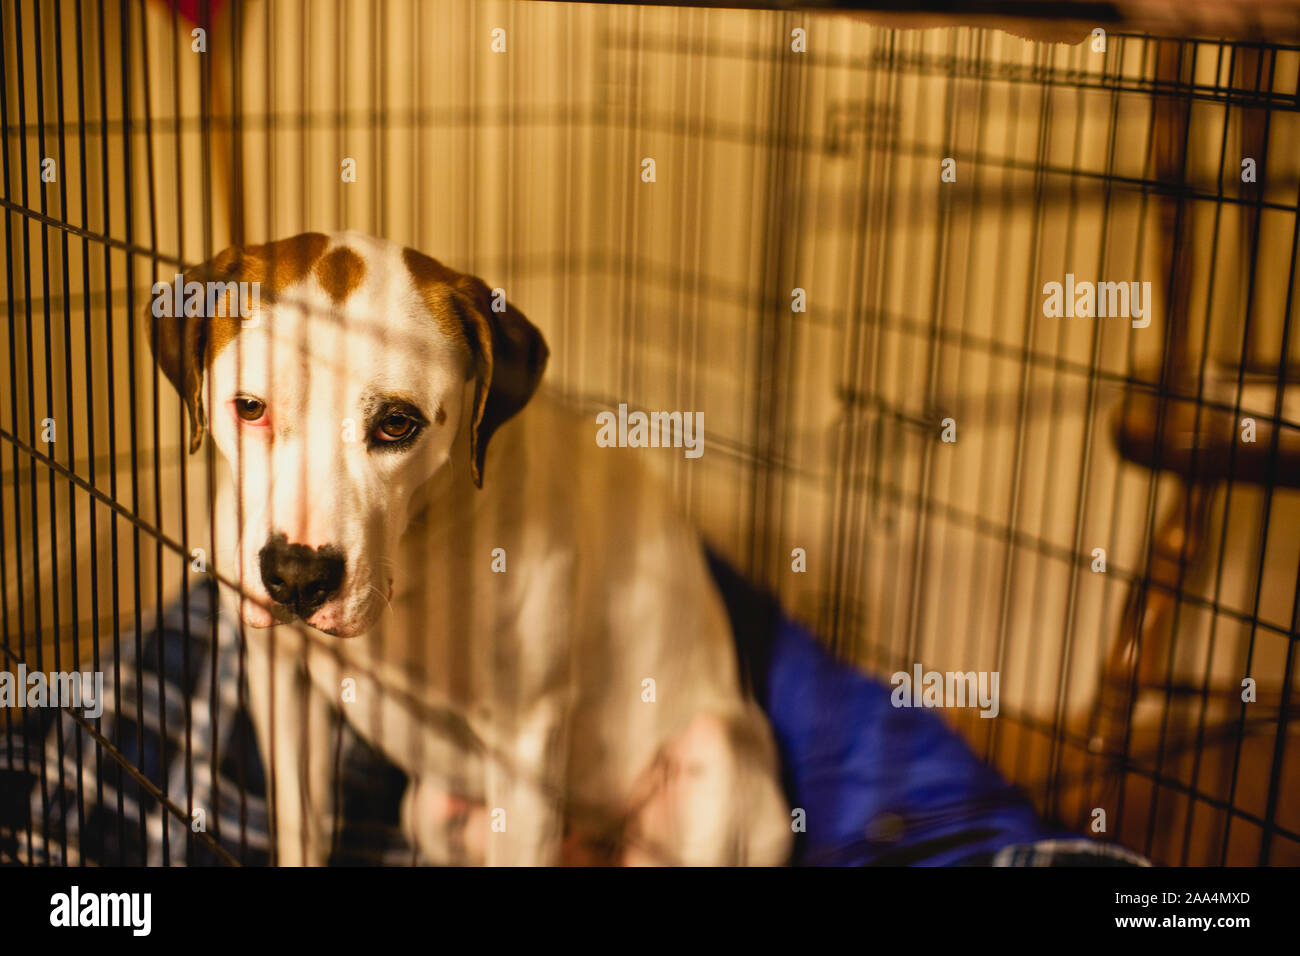 Sad looking dog in it's cage Stock Photo